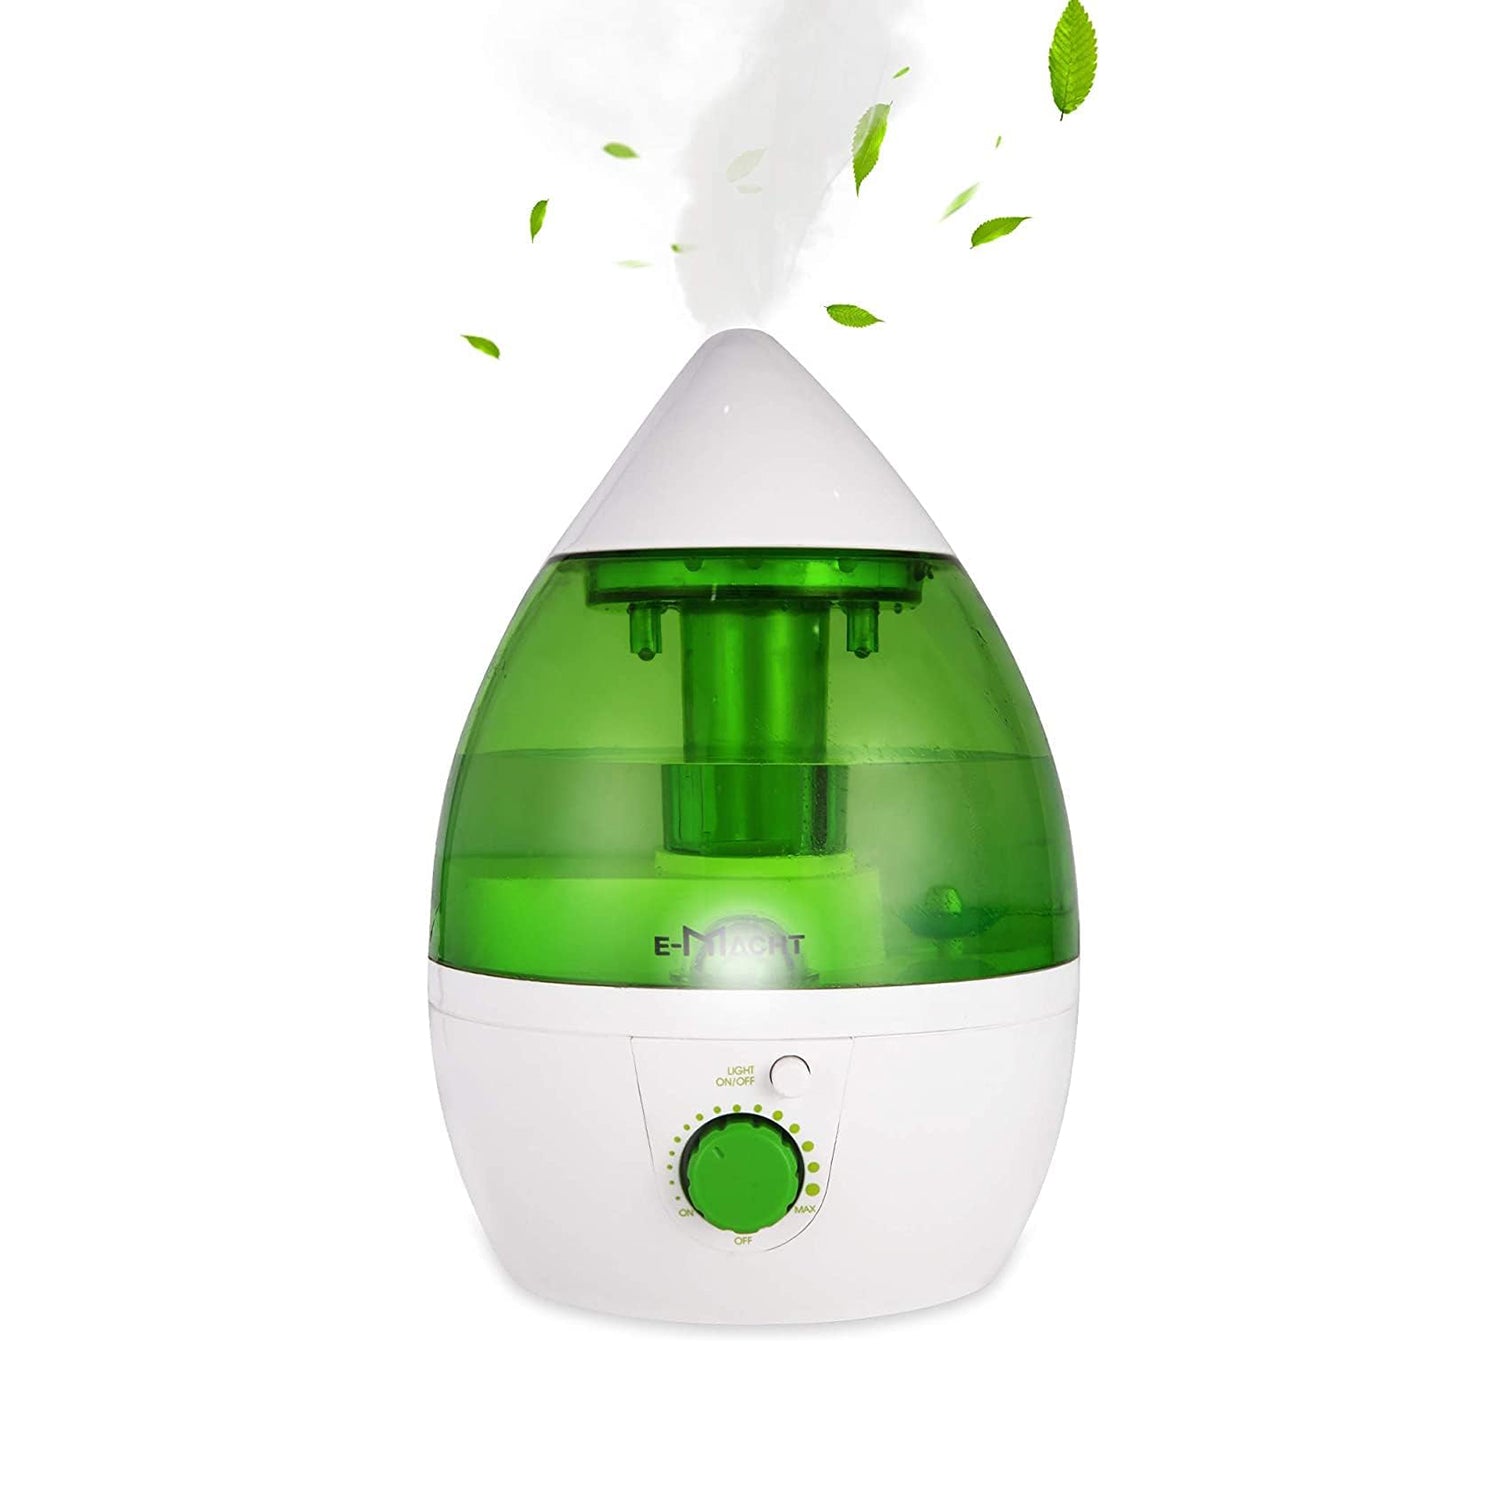 Humidifiers for Bedroom Quiet Ultrasonic Cool Mist Humidifier 1.1L with Auto Shut-Off, Green